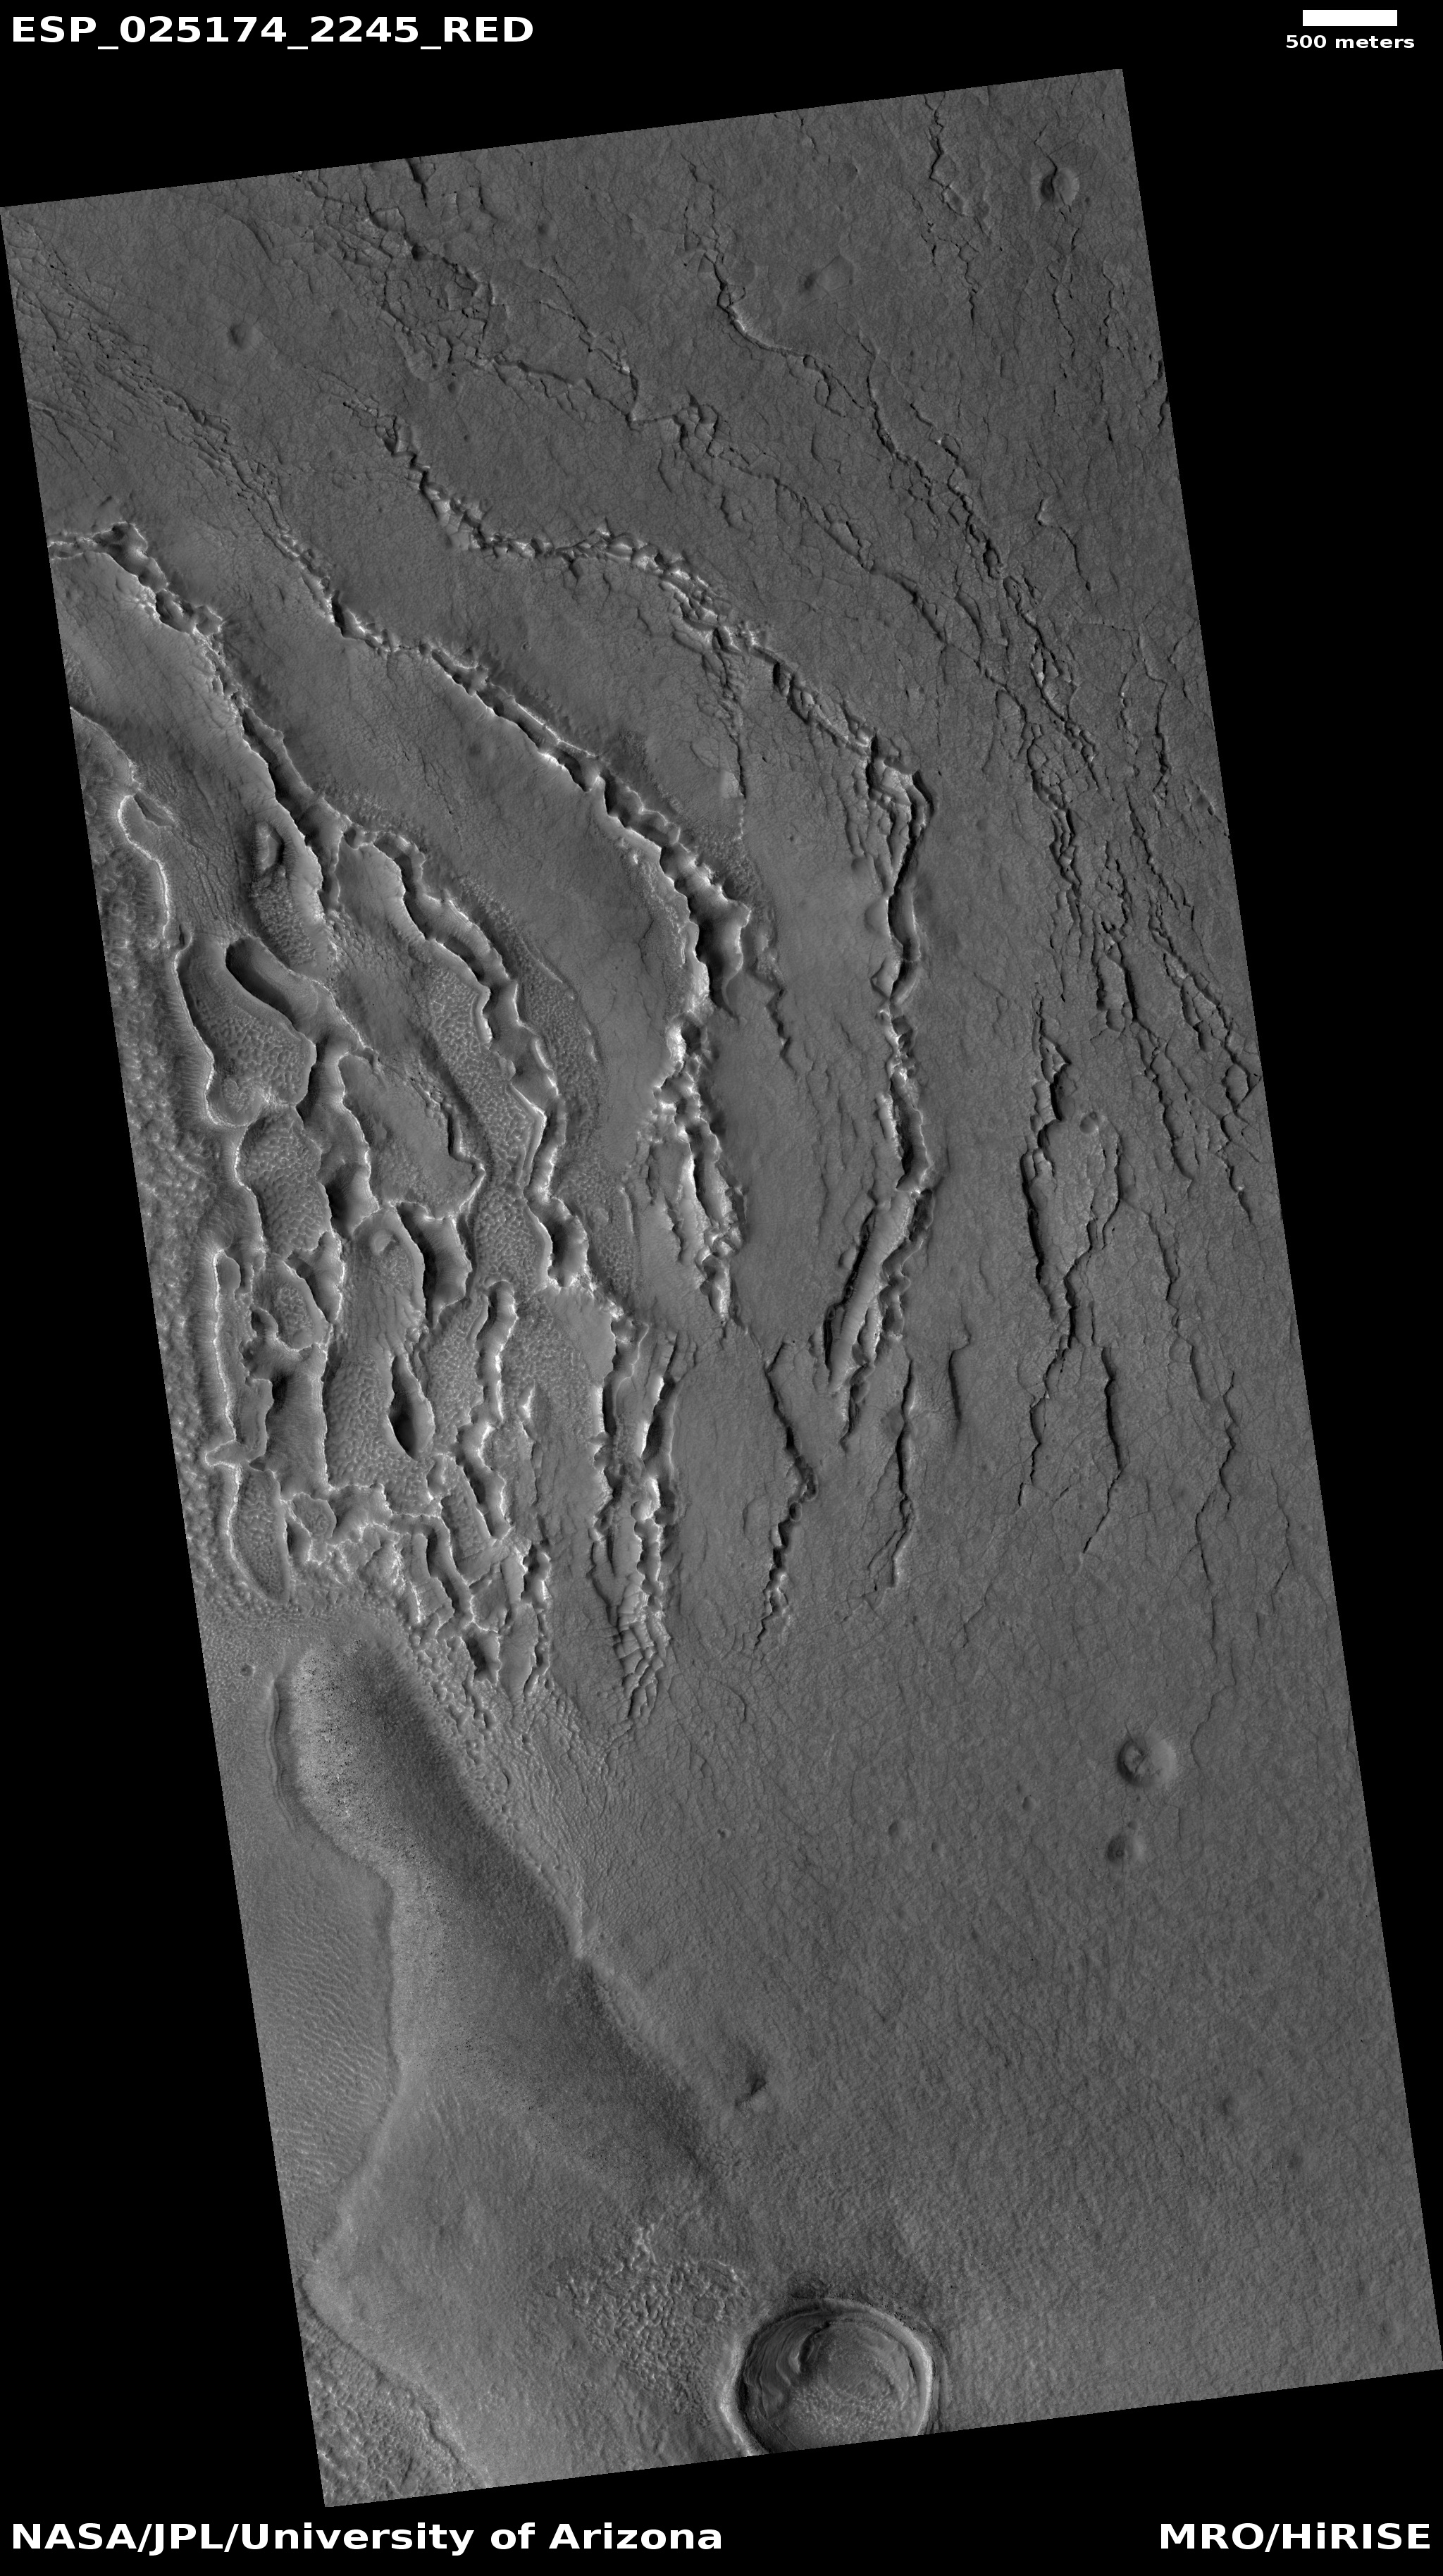 Wide view of ribbed terrain.